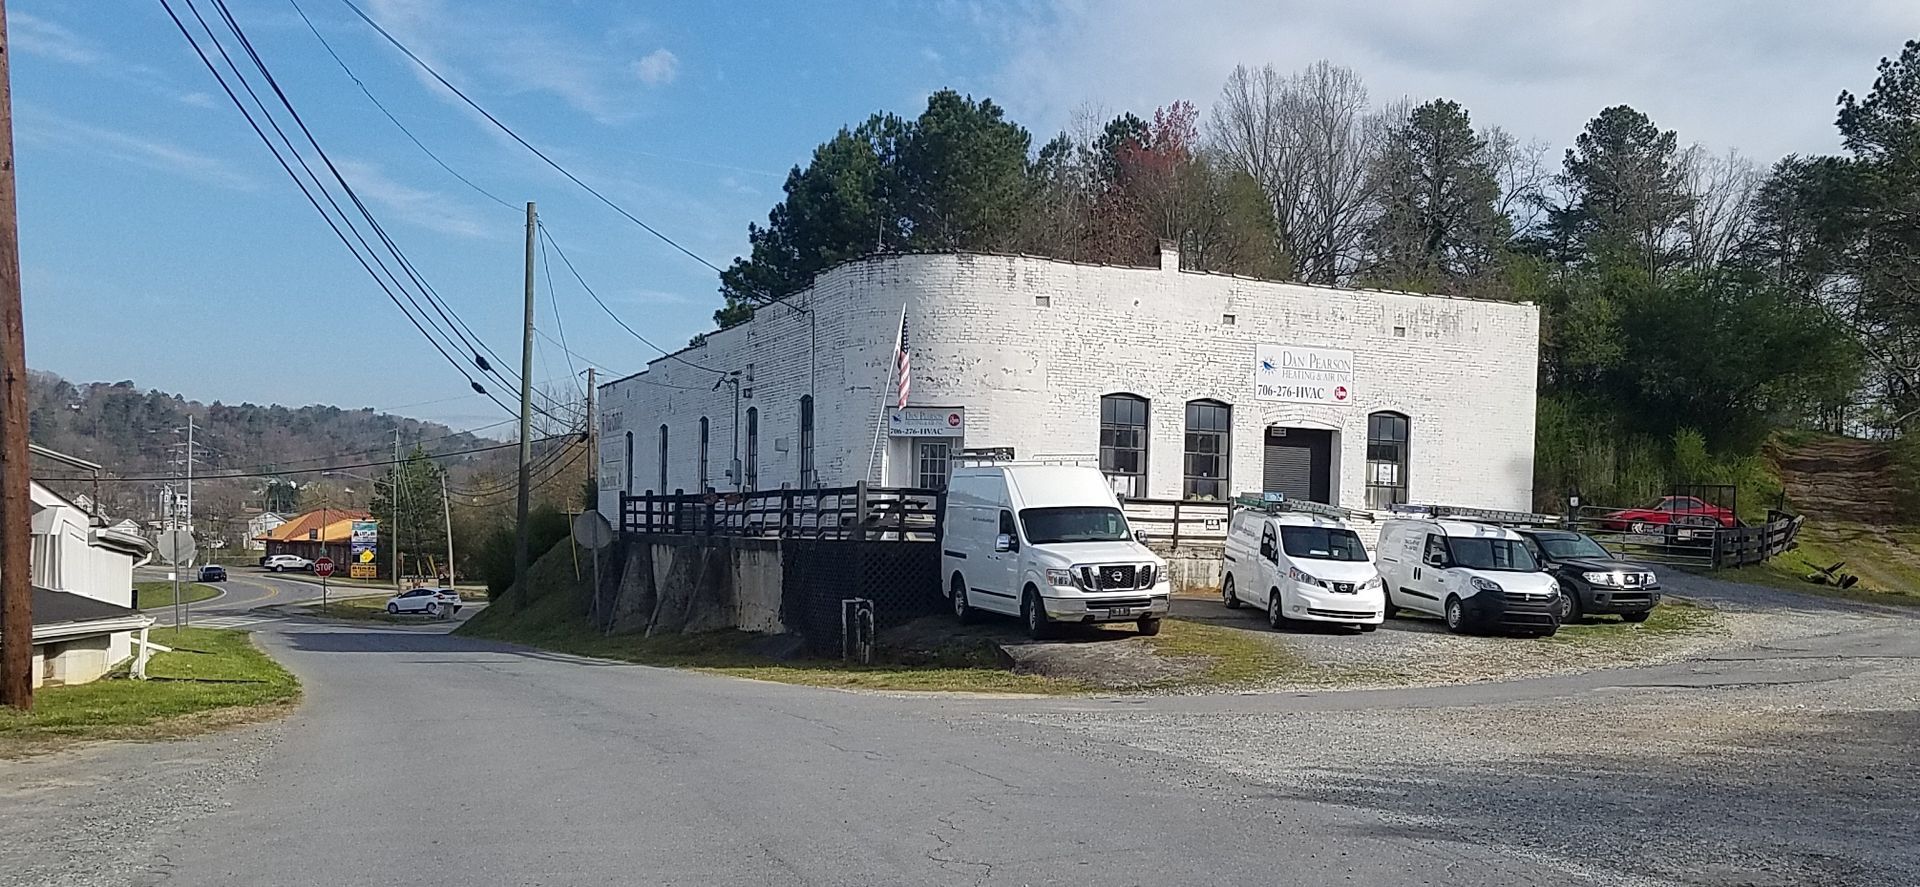 A white building that is the office of Dan Pearson Heating & Air with HVAC trucks parked in front.